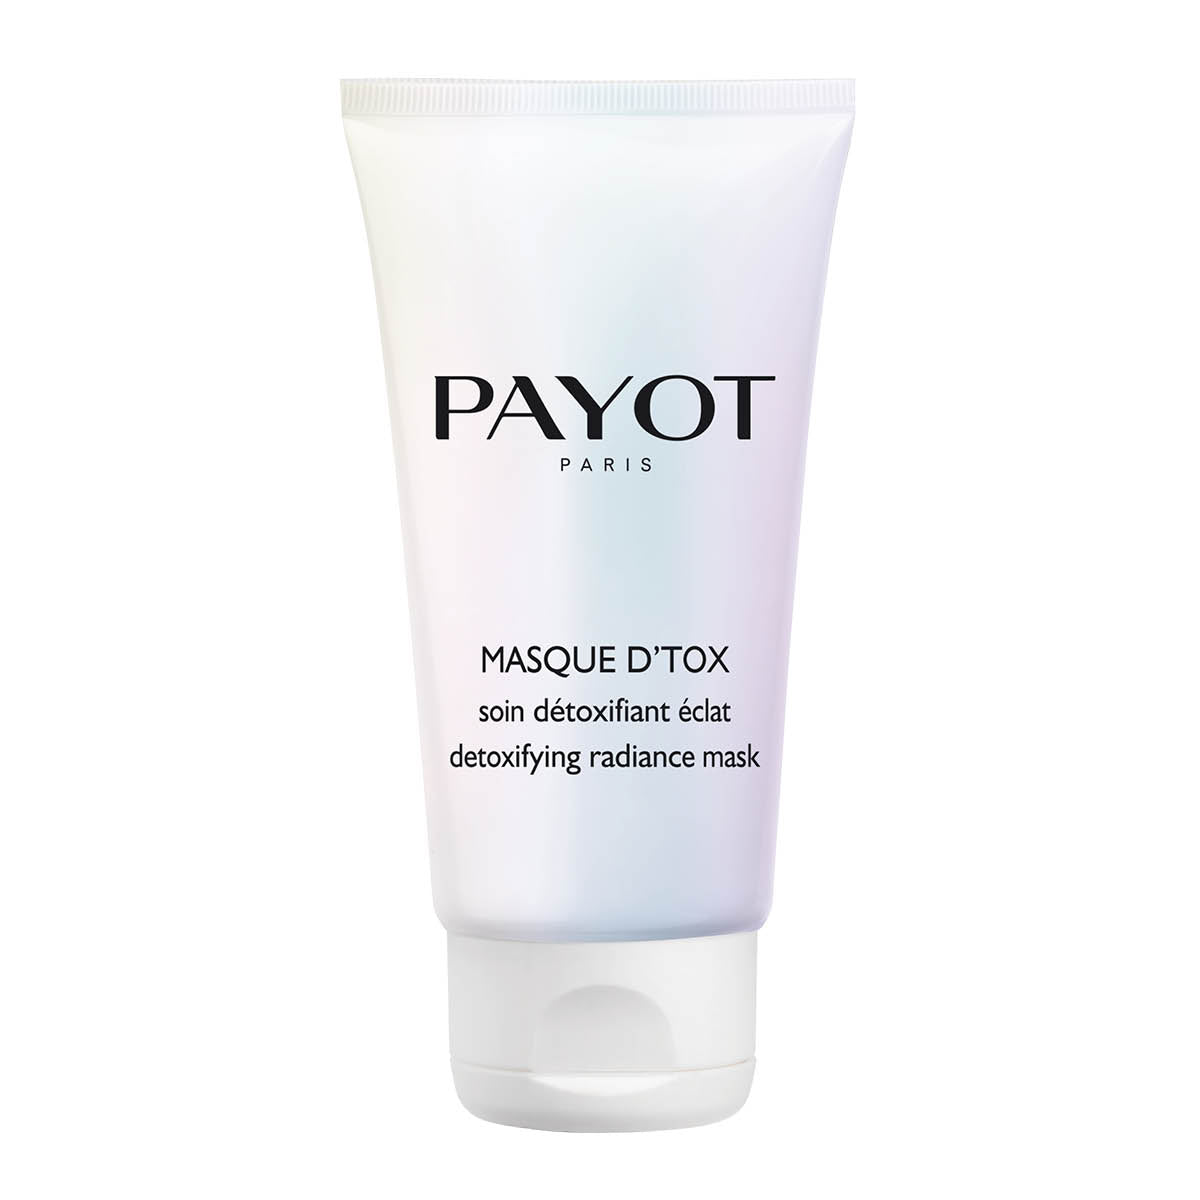 Payot Masque D'Tox Deep Cleansing Masque 50ml